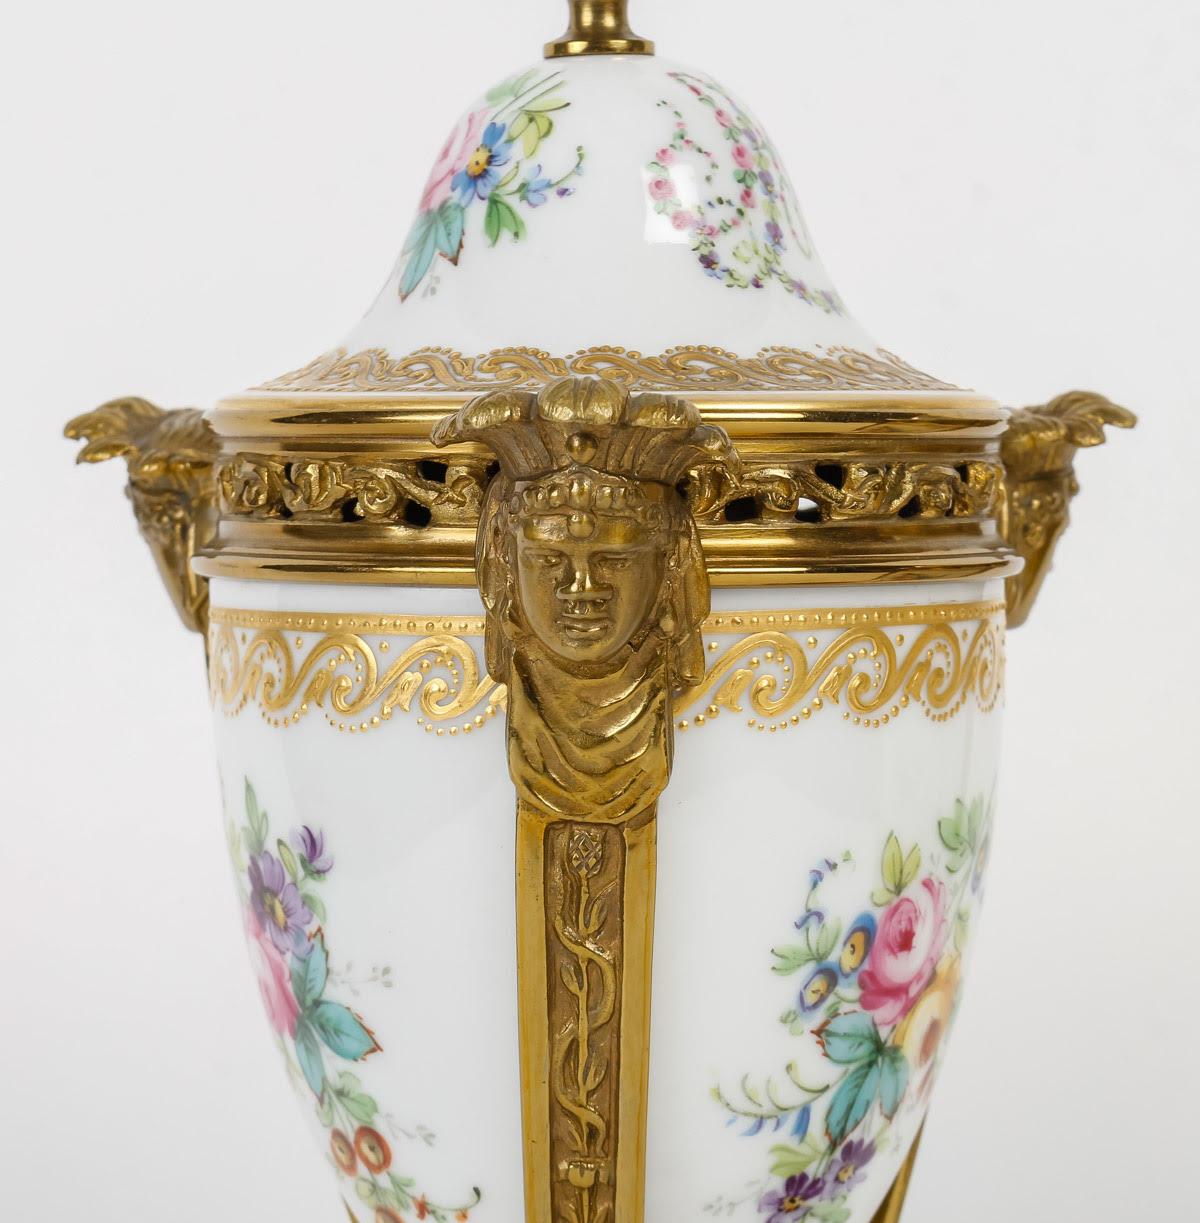 Pair of Perfume Burners from the Manufacture de Sèvres, Early 20th Century.

A pair of early 20th century gilt bronze and painted and gilt porcelain perfume burners from the Manufacture de Sèvres.
H: 26cm, d: 12cm